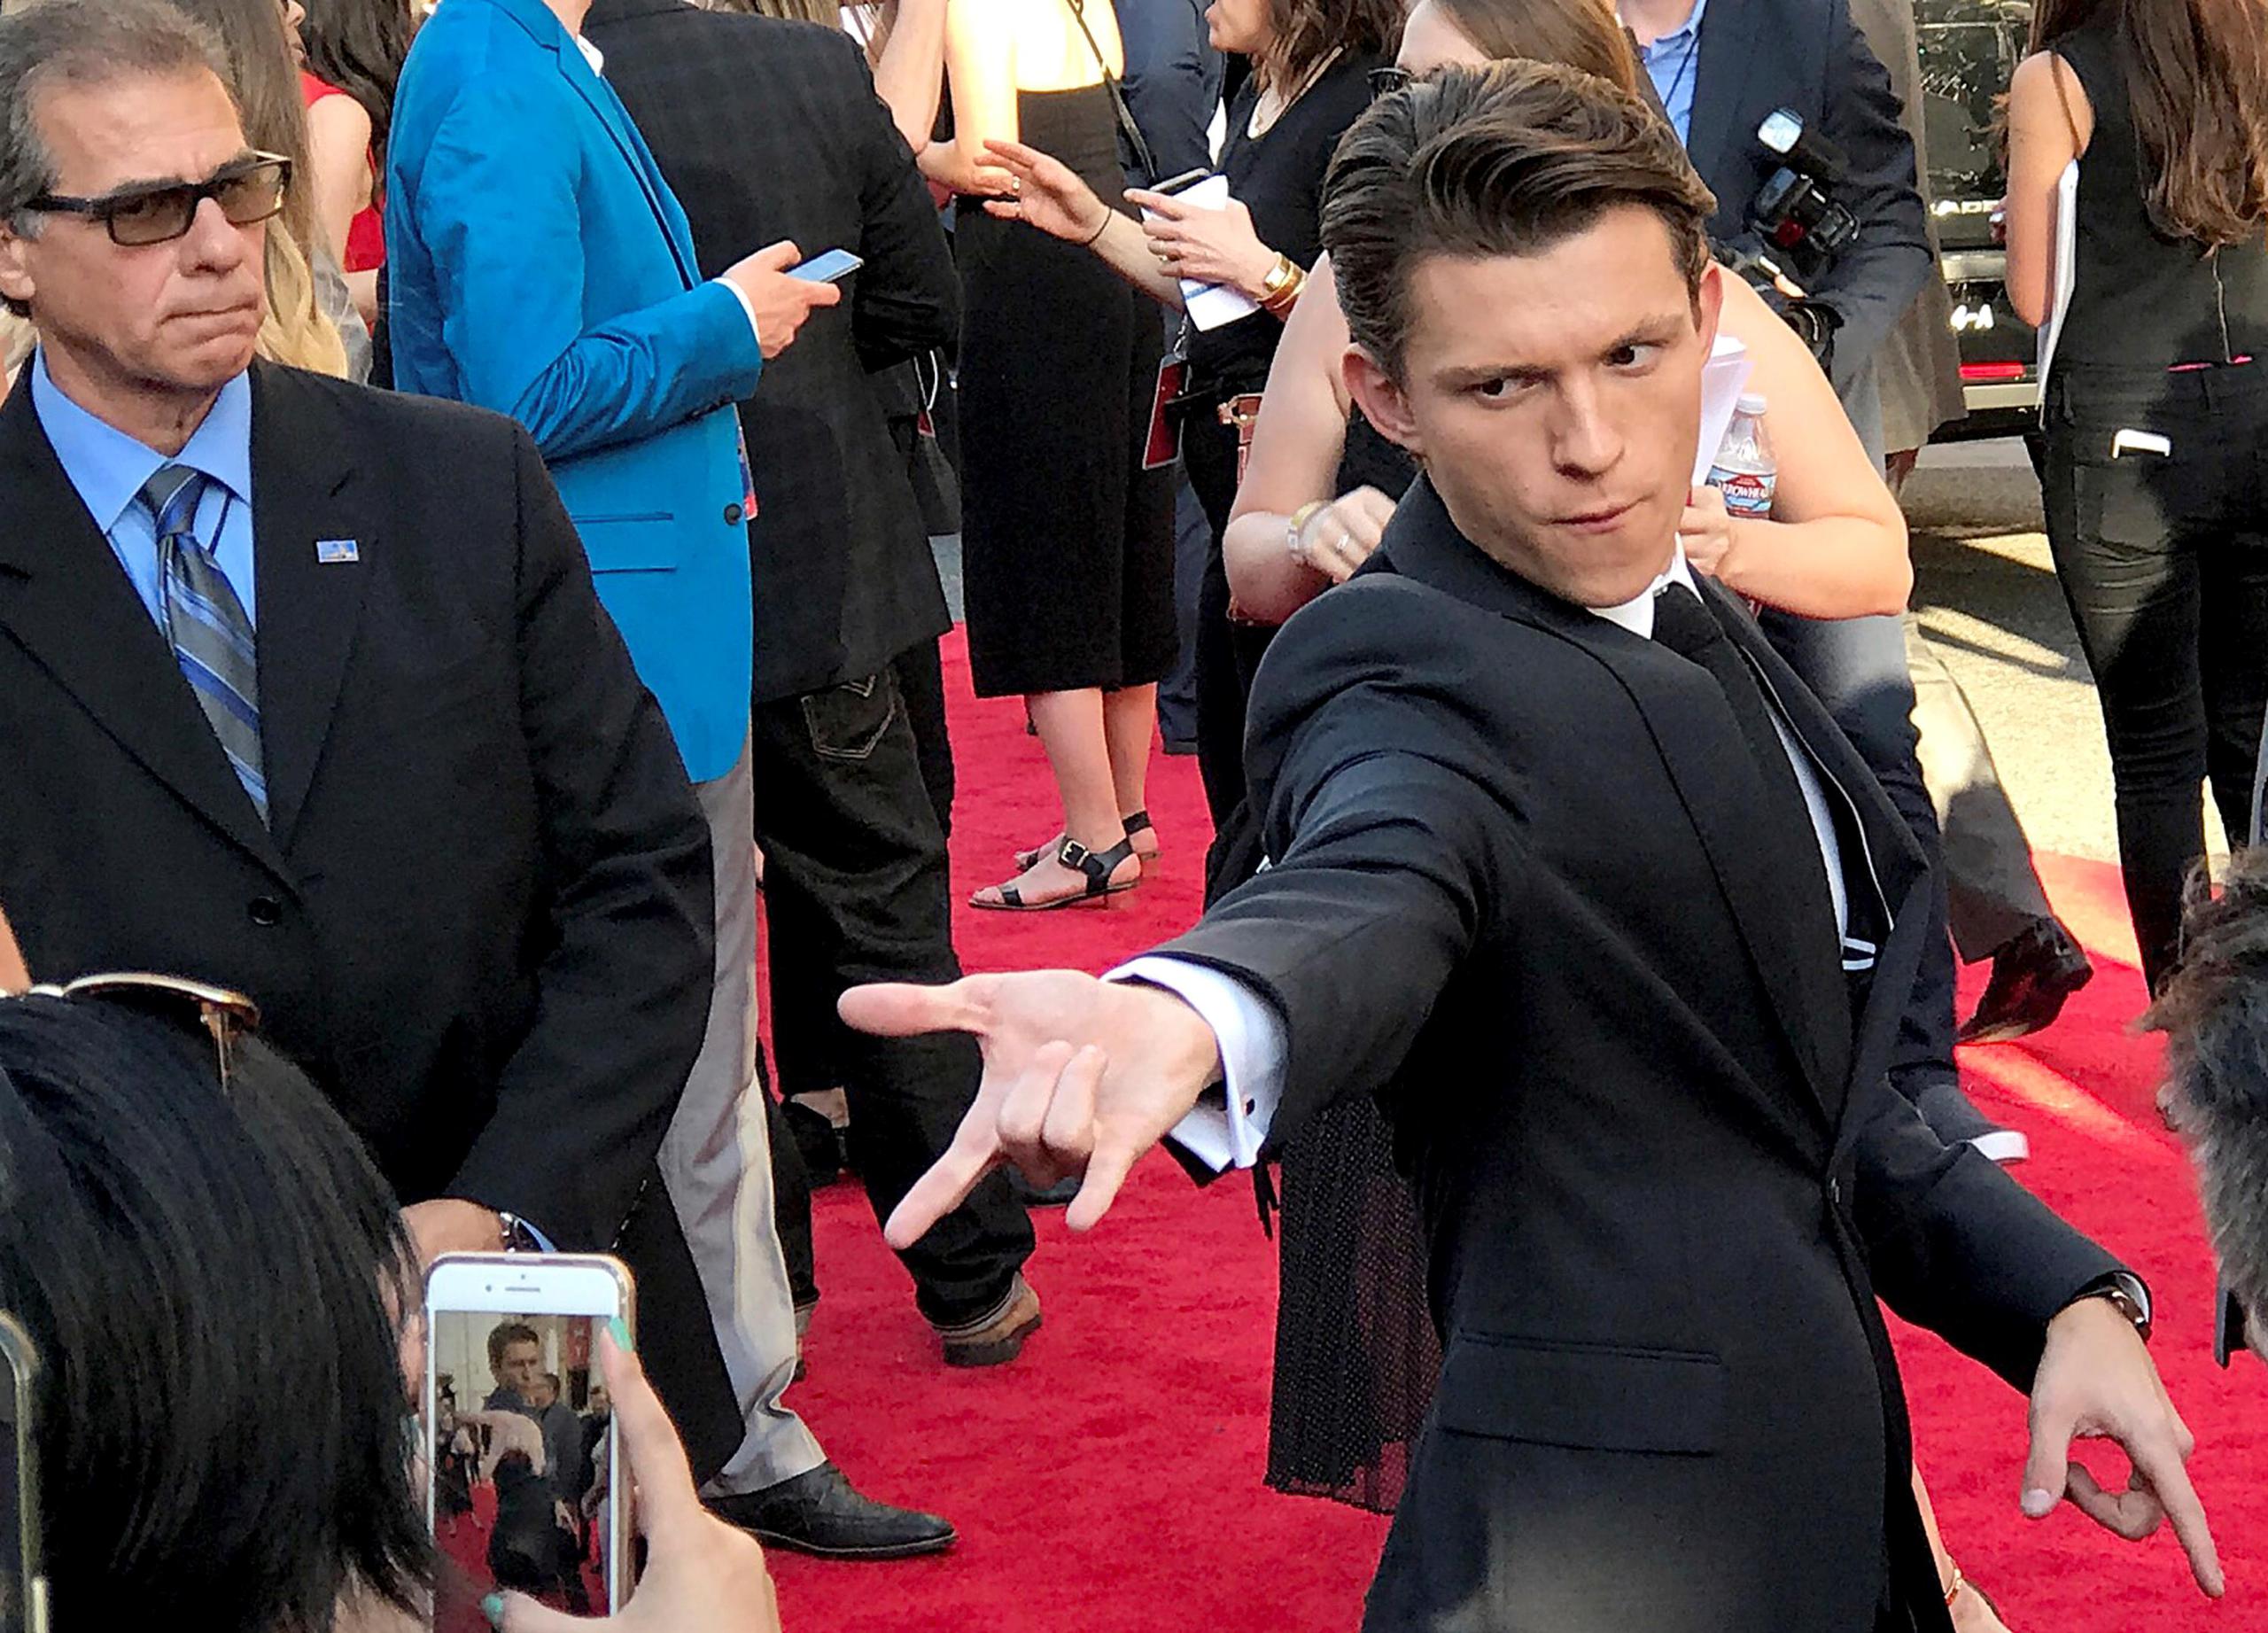 Tom Holland, actor known for playing Spiderman